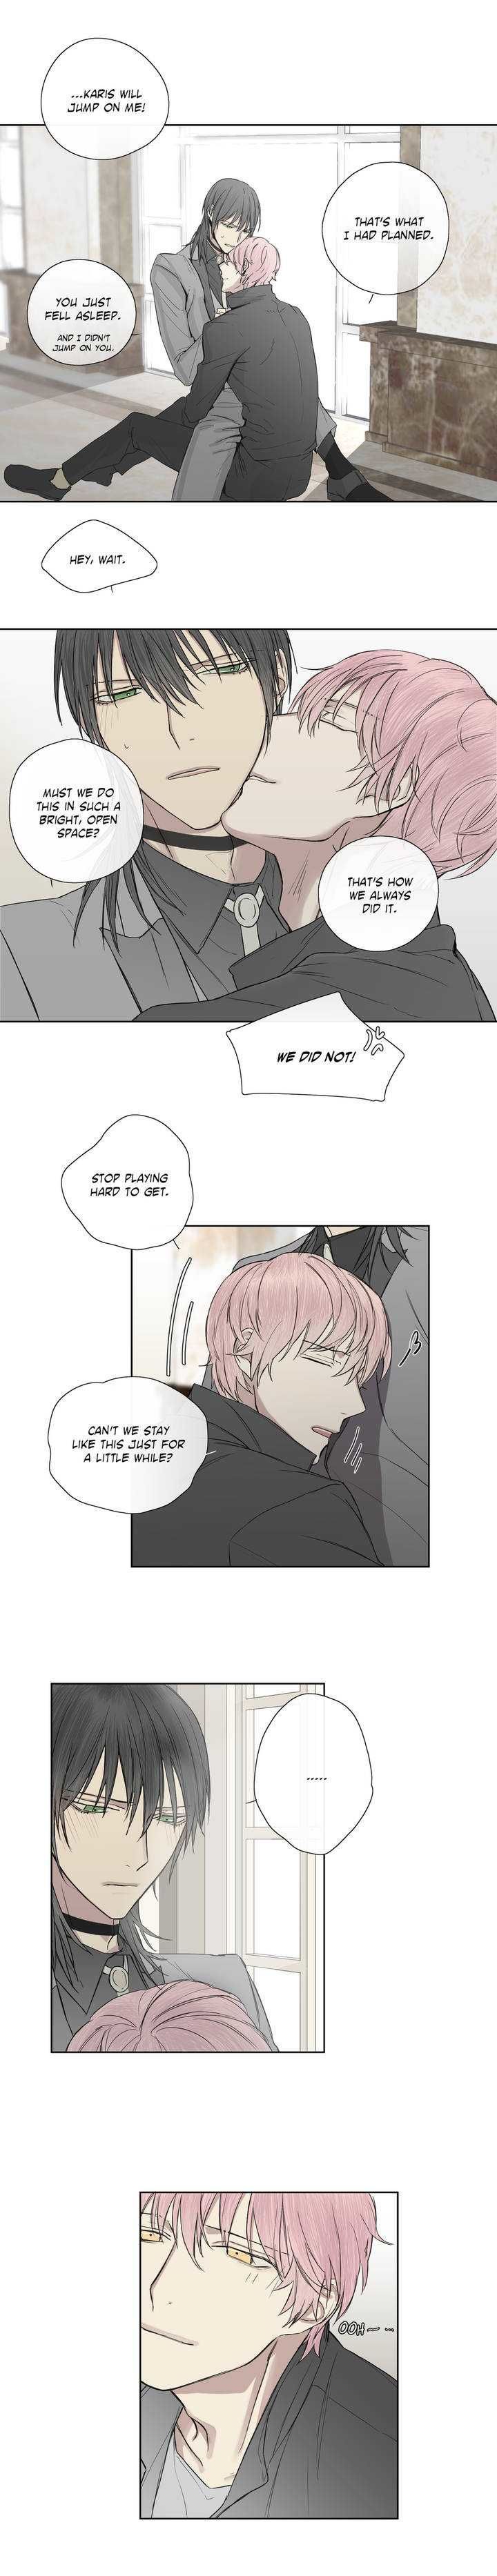 Royal Servant - Chapter 4 Page 15